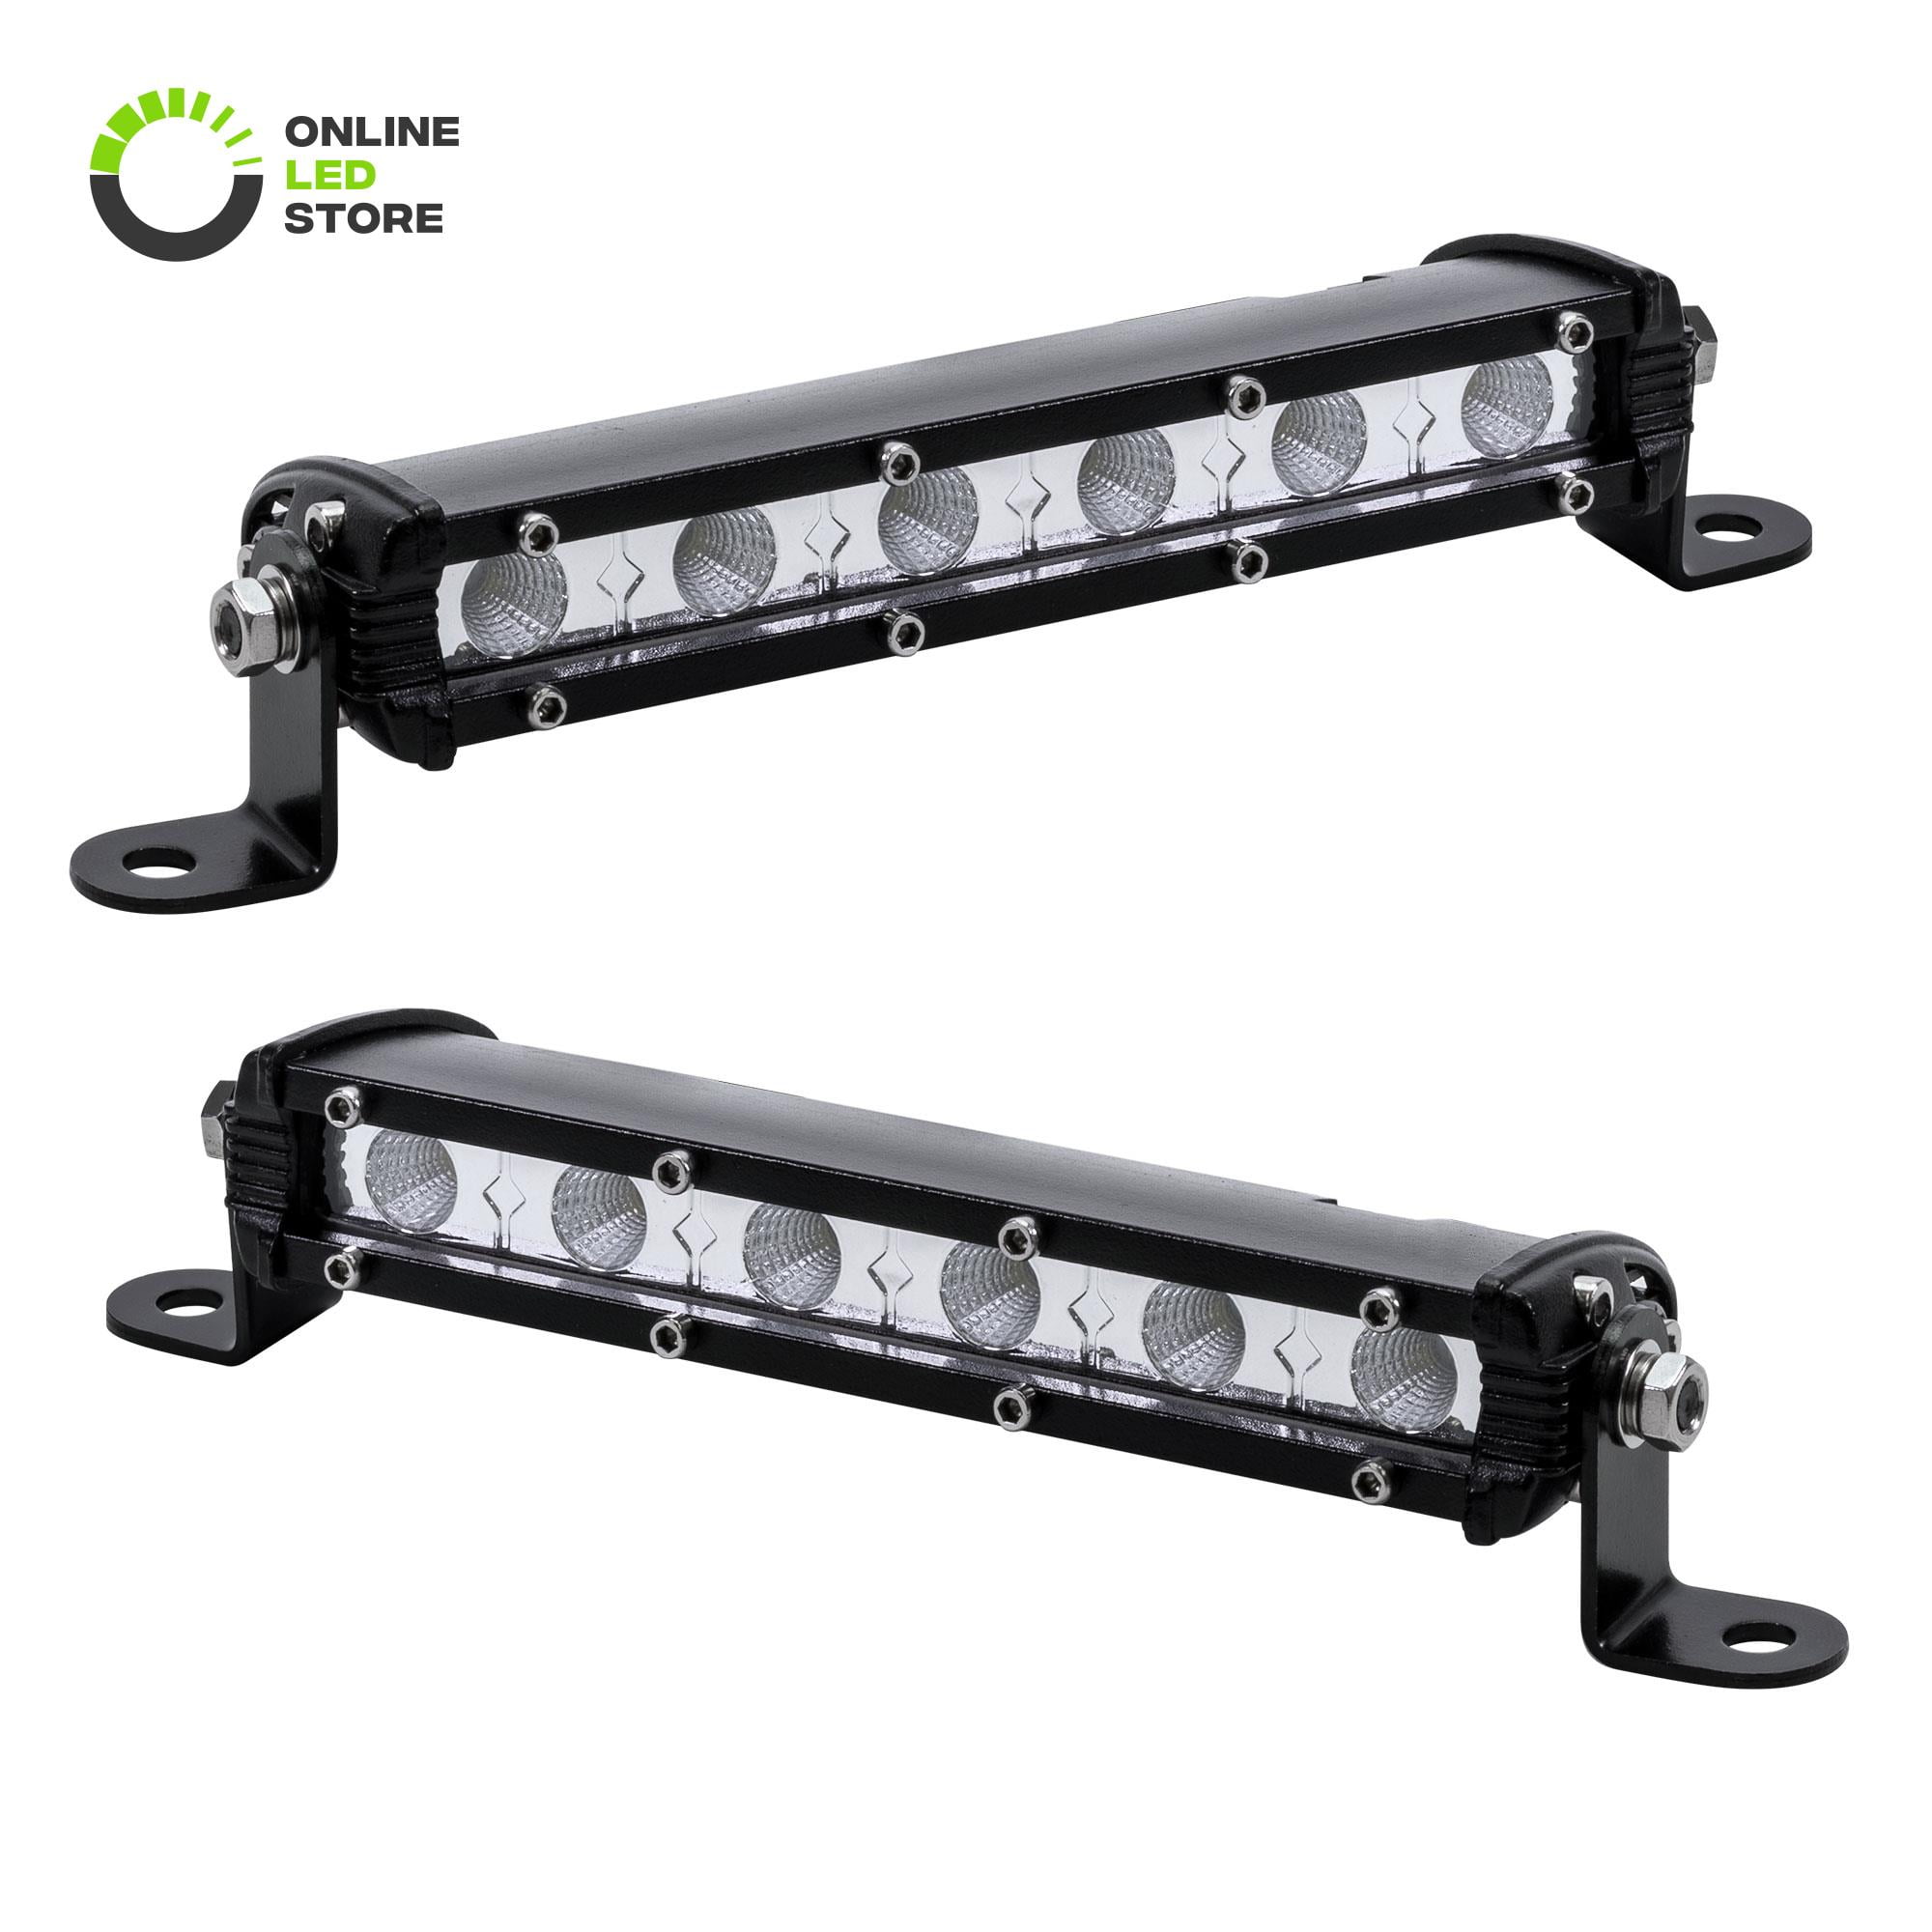 Colight 9632T-23 inch 3 Years Warranty LED light bar 23 inch 320W Driving Light Waterproof Led Work Light Three Row for Off-road Truck Car ATV SUV Cabin Boat